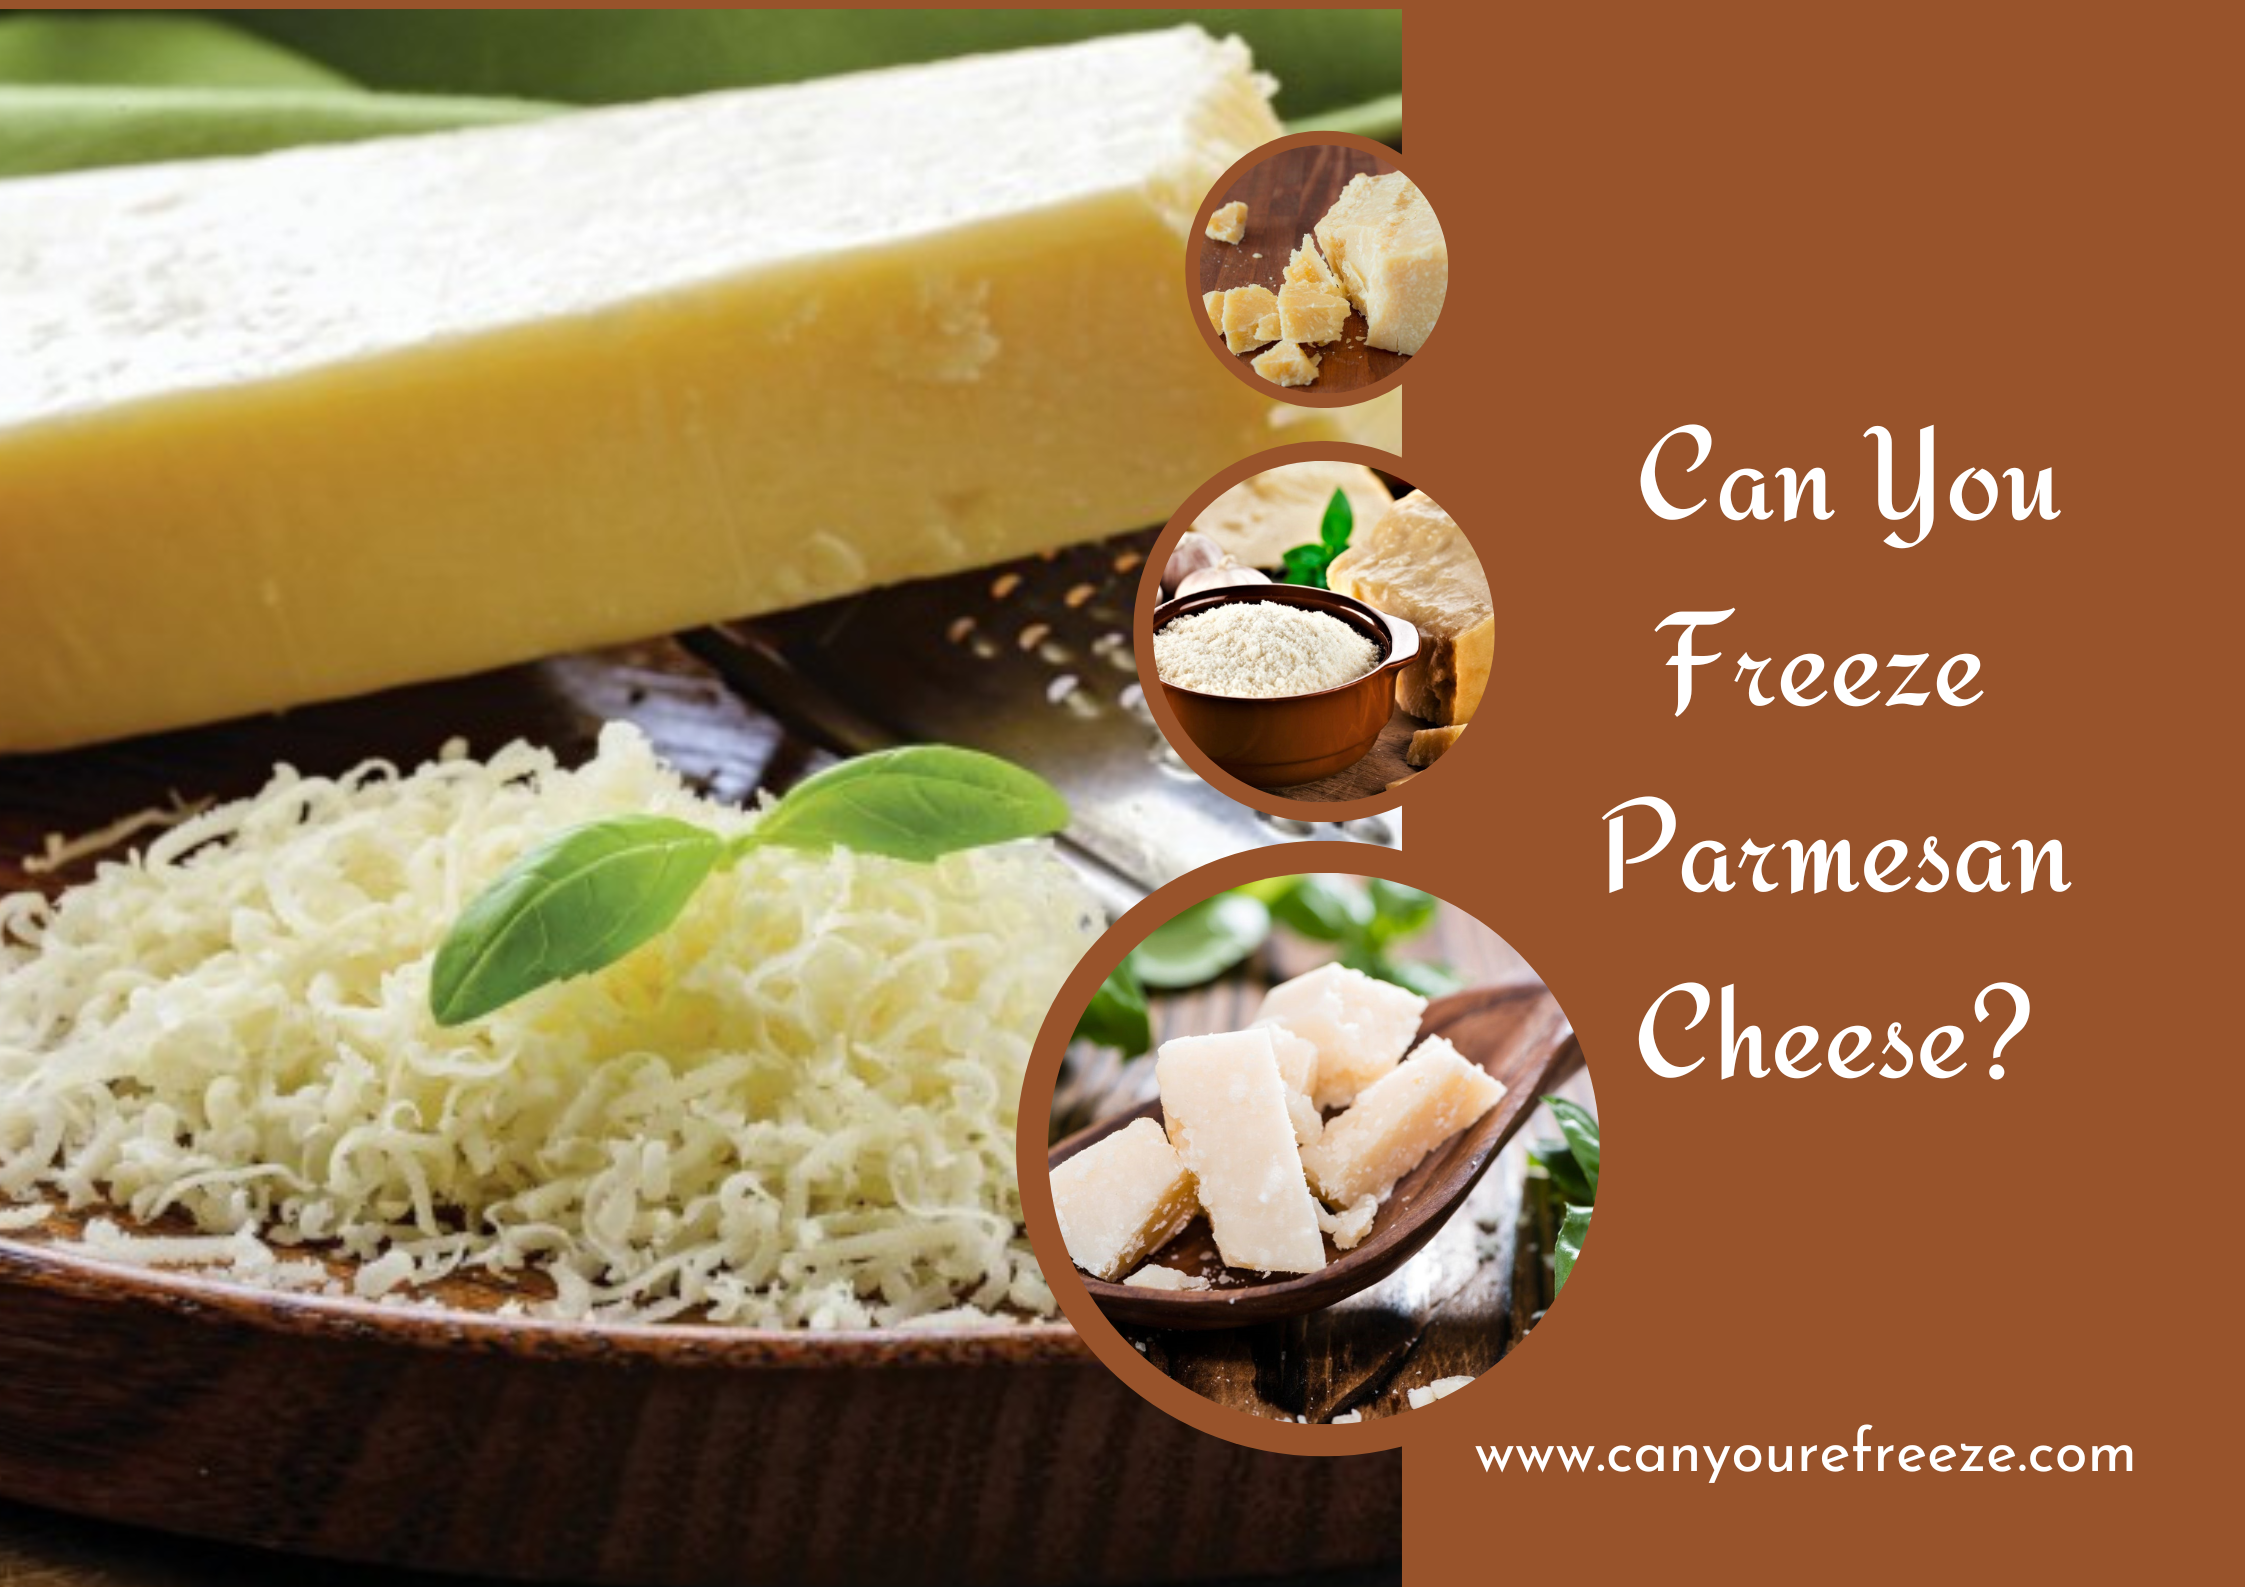 Can You Freeze Parmesan Cheese